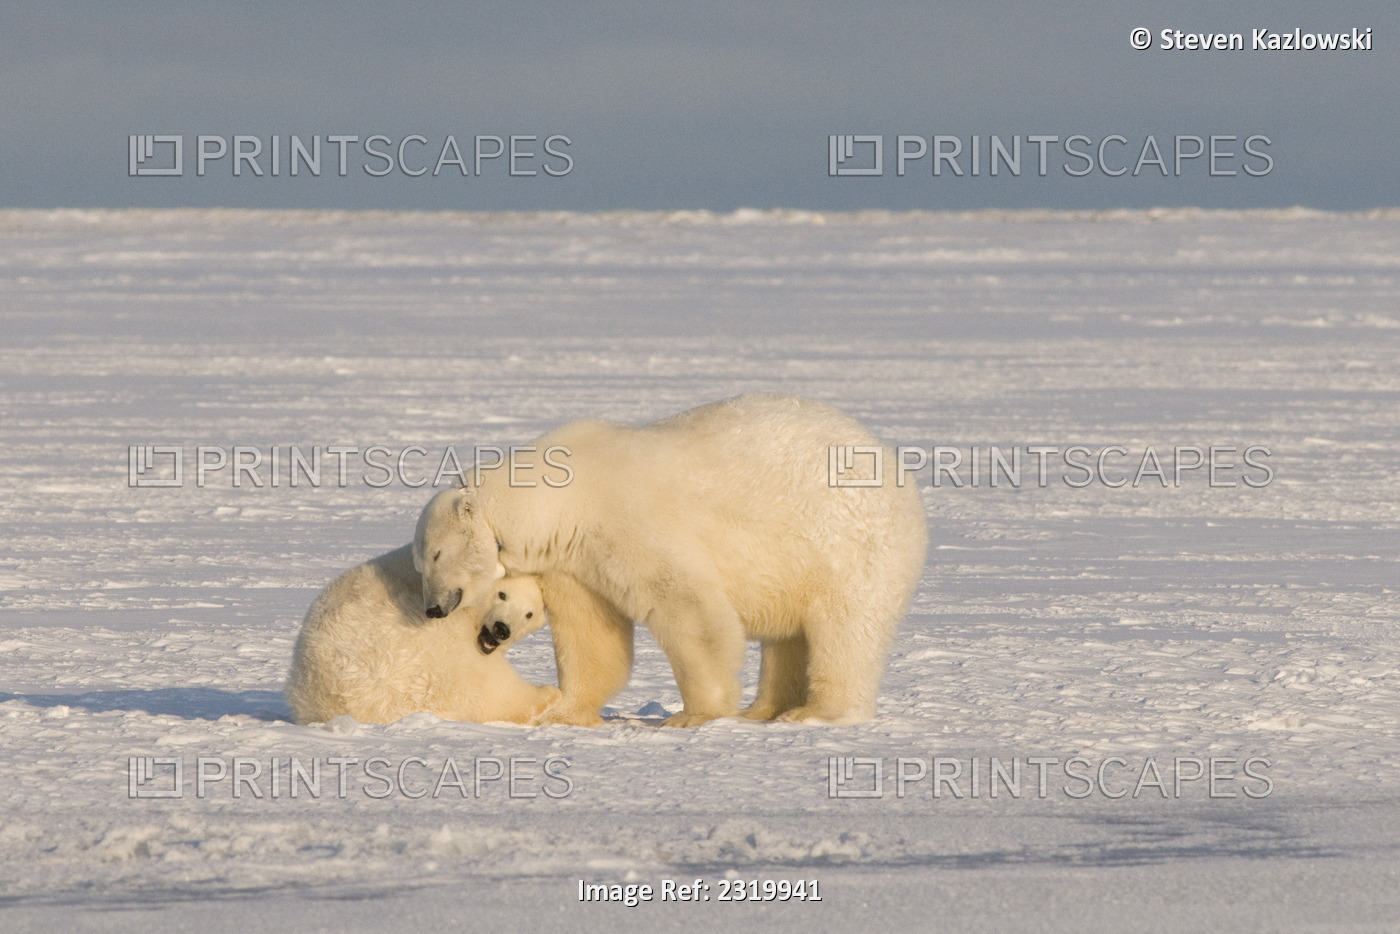 Two Year Old Polar Bear Cub Plays With Its Mother On Newly Formed Pack Ice ...